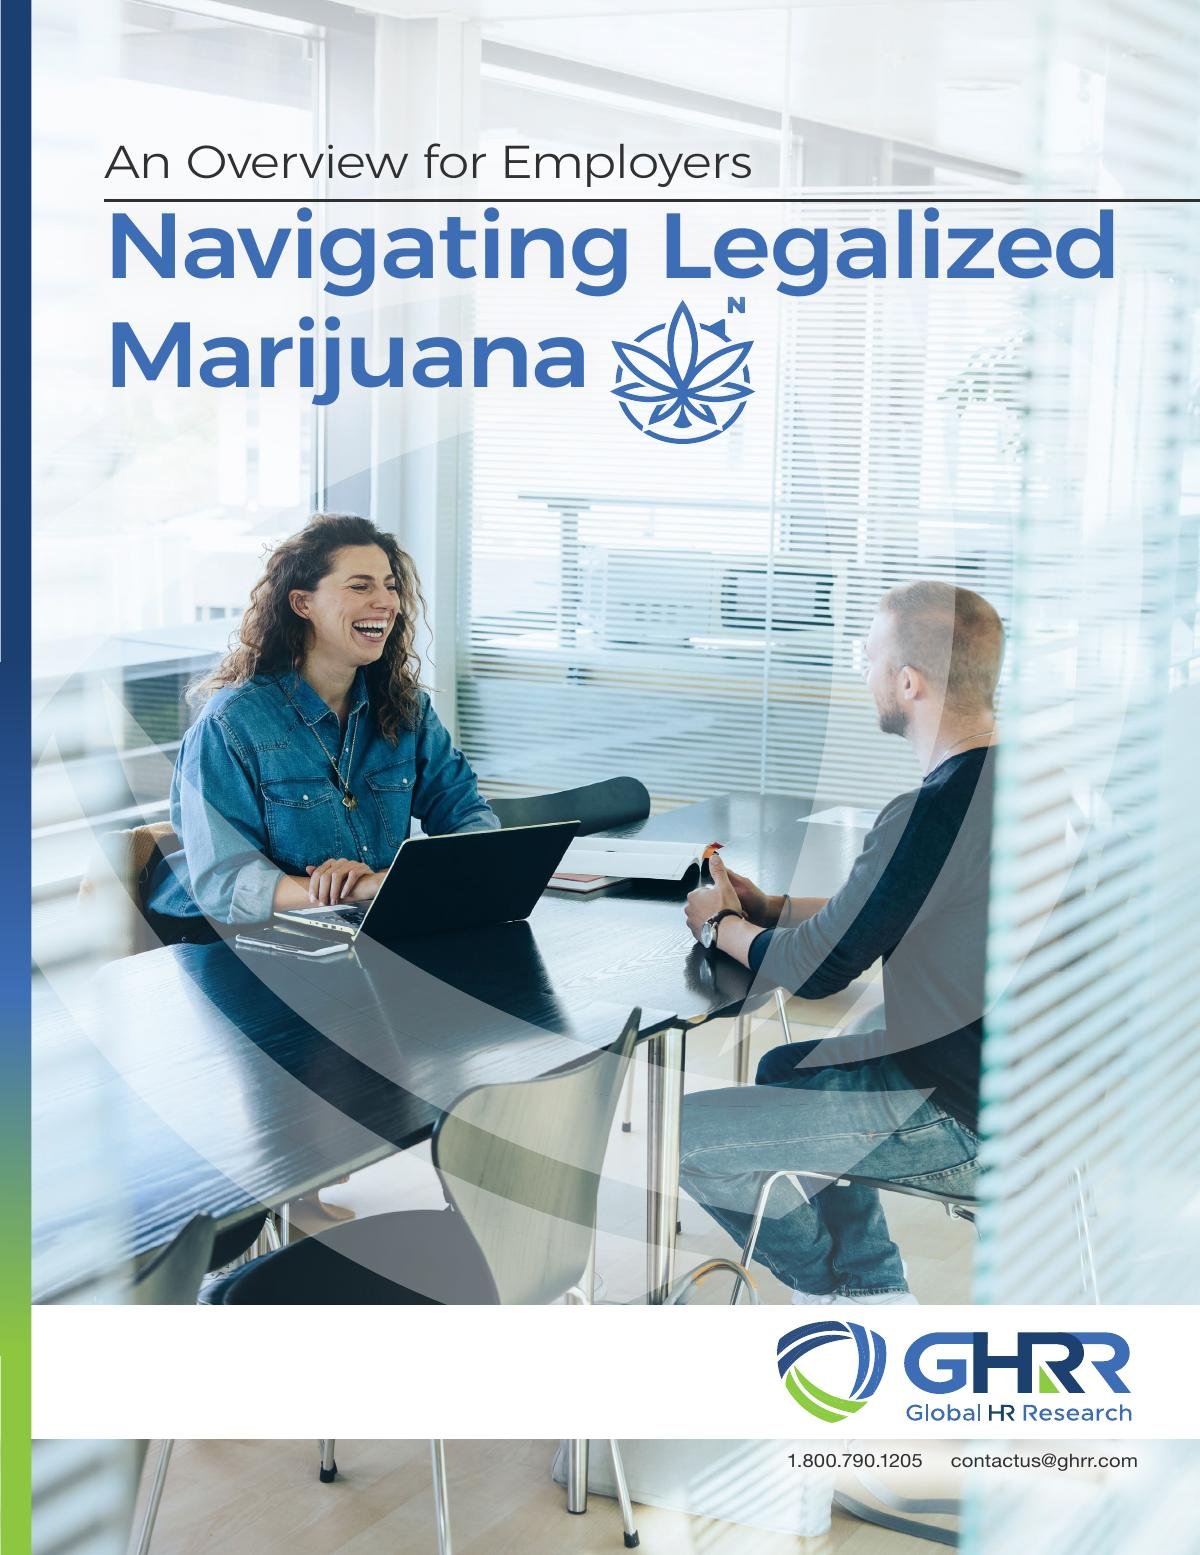 Navigating Legalized Marijuana - An Overview for Employers